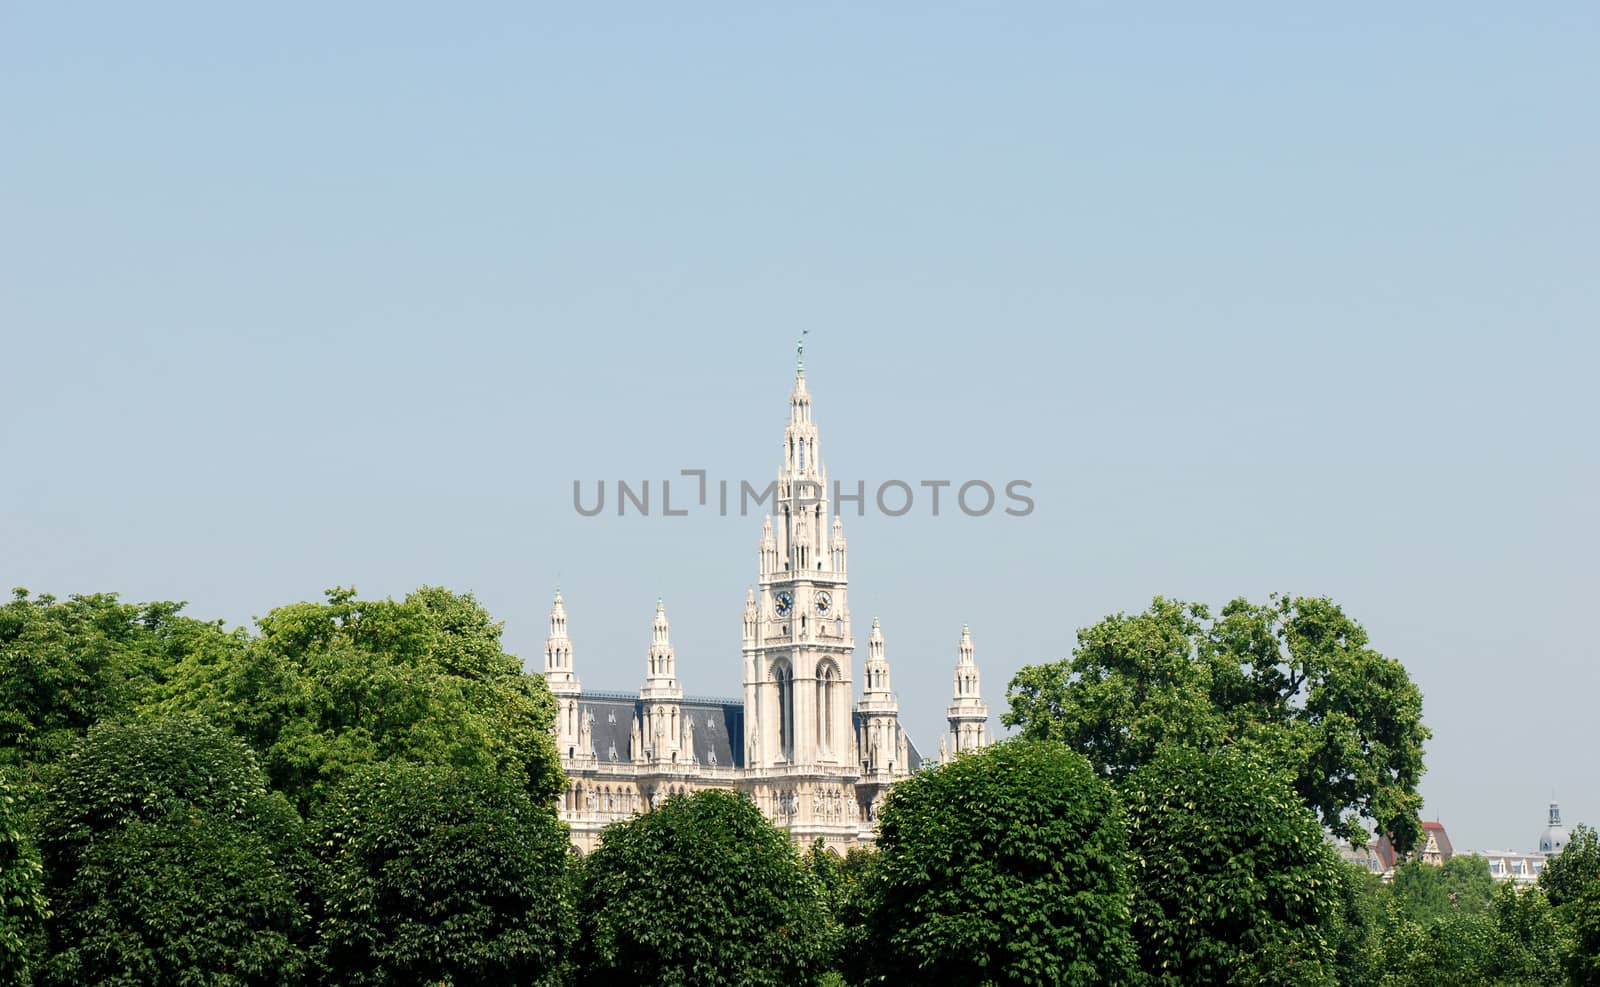 The spires of the Rathaus (City Hall) rise above the trees in Heldenplatz, Vienna